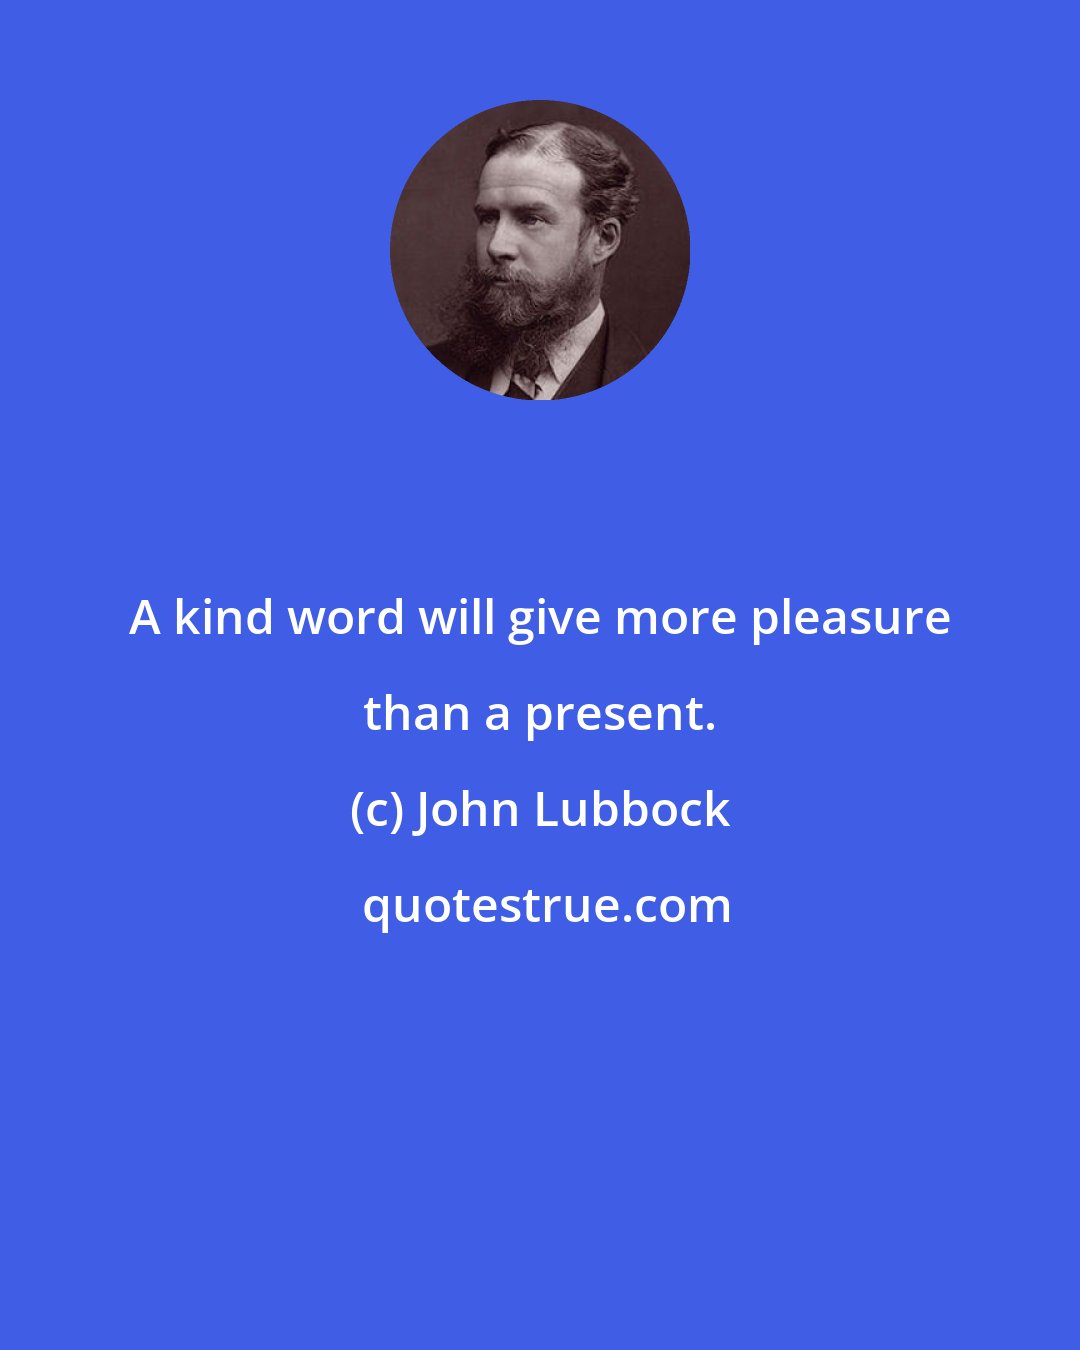 John Lubbock: A kind word will give more pleasure than a present.